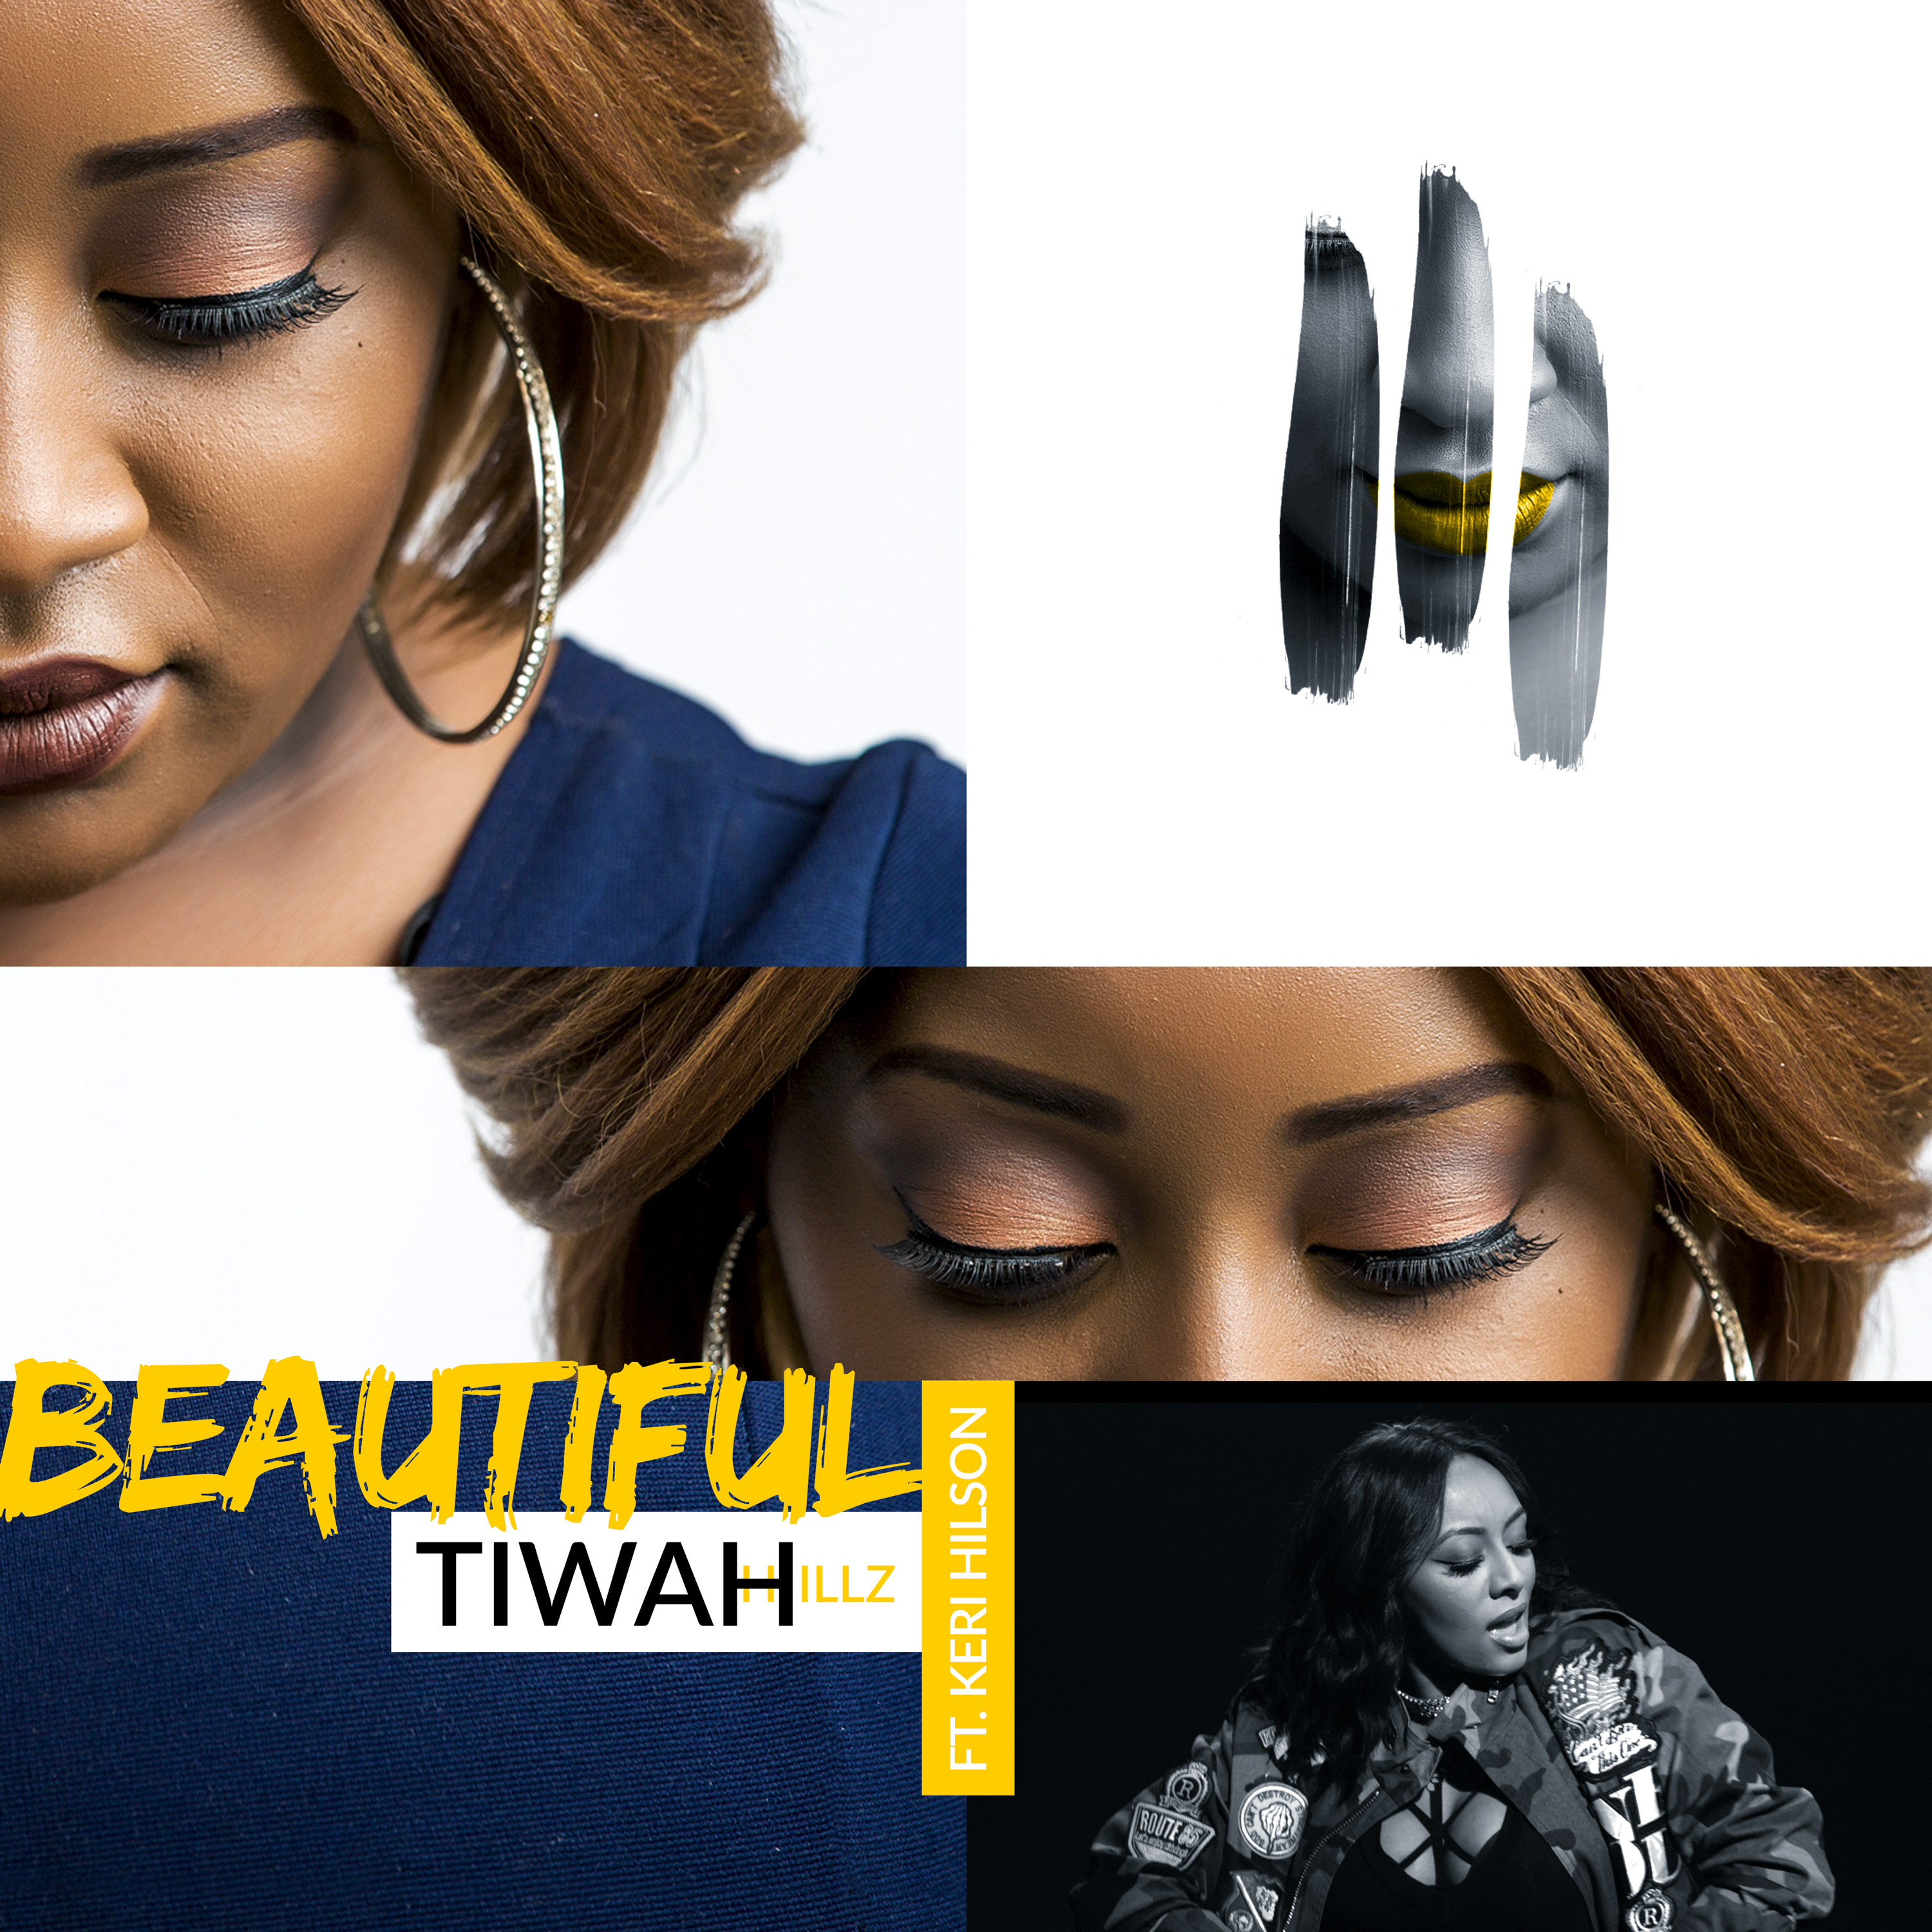 tiwahhillz-cover-beautiful-220617-annule-remplace